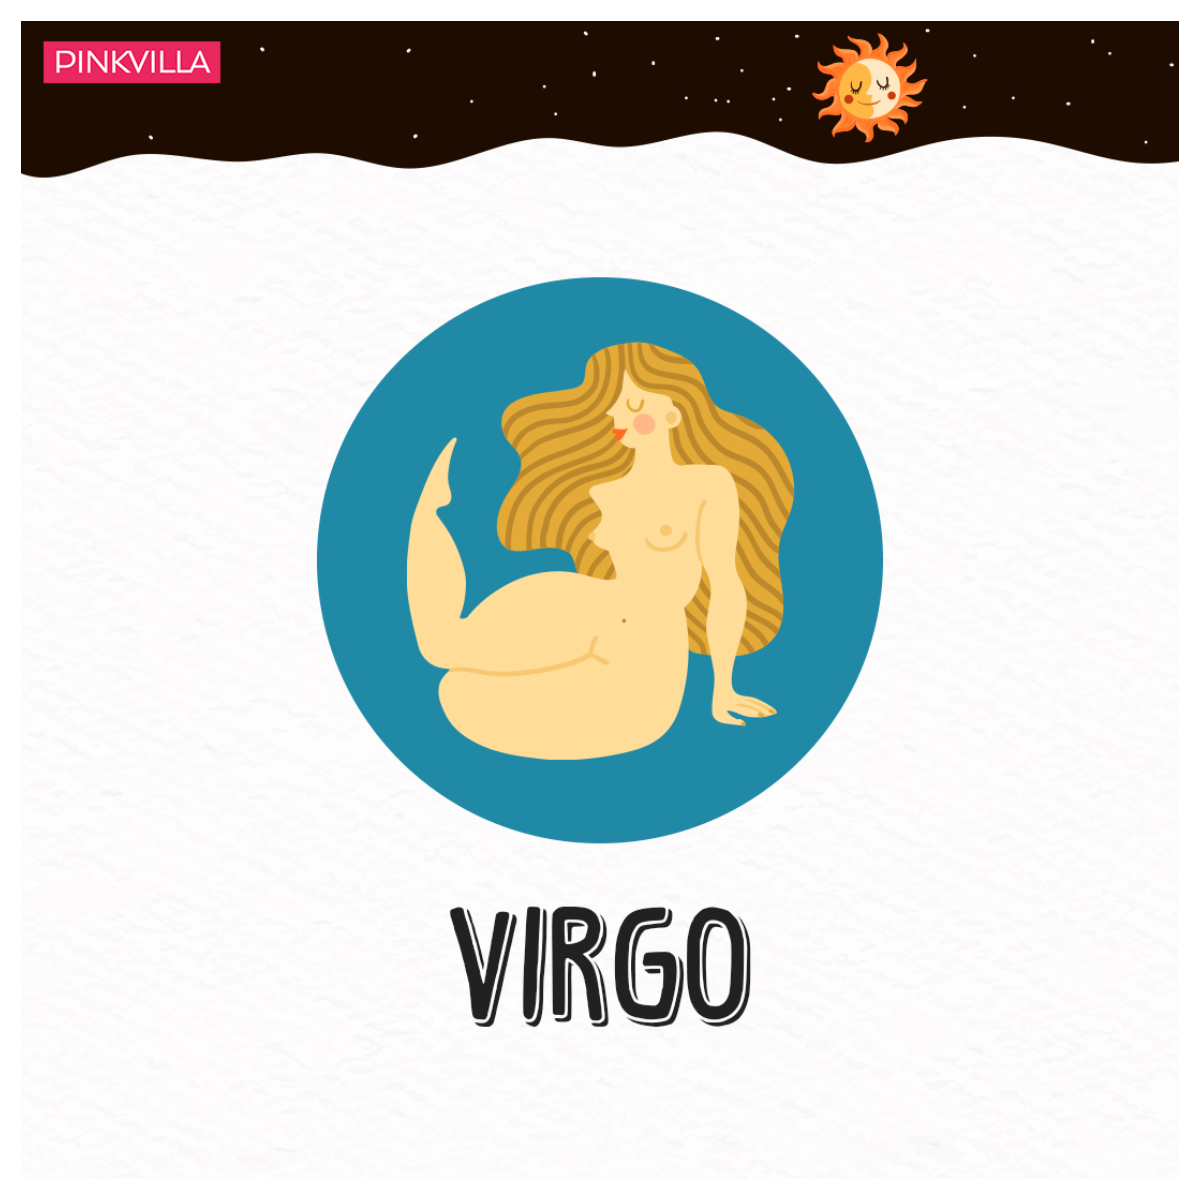 Leo to Virgo: 5 Zodiac signs that are likely to have stable relationships